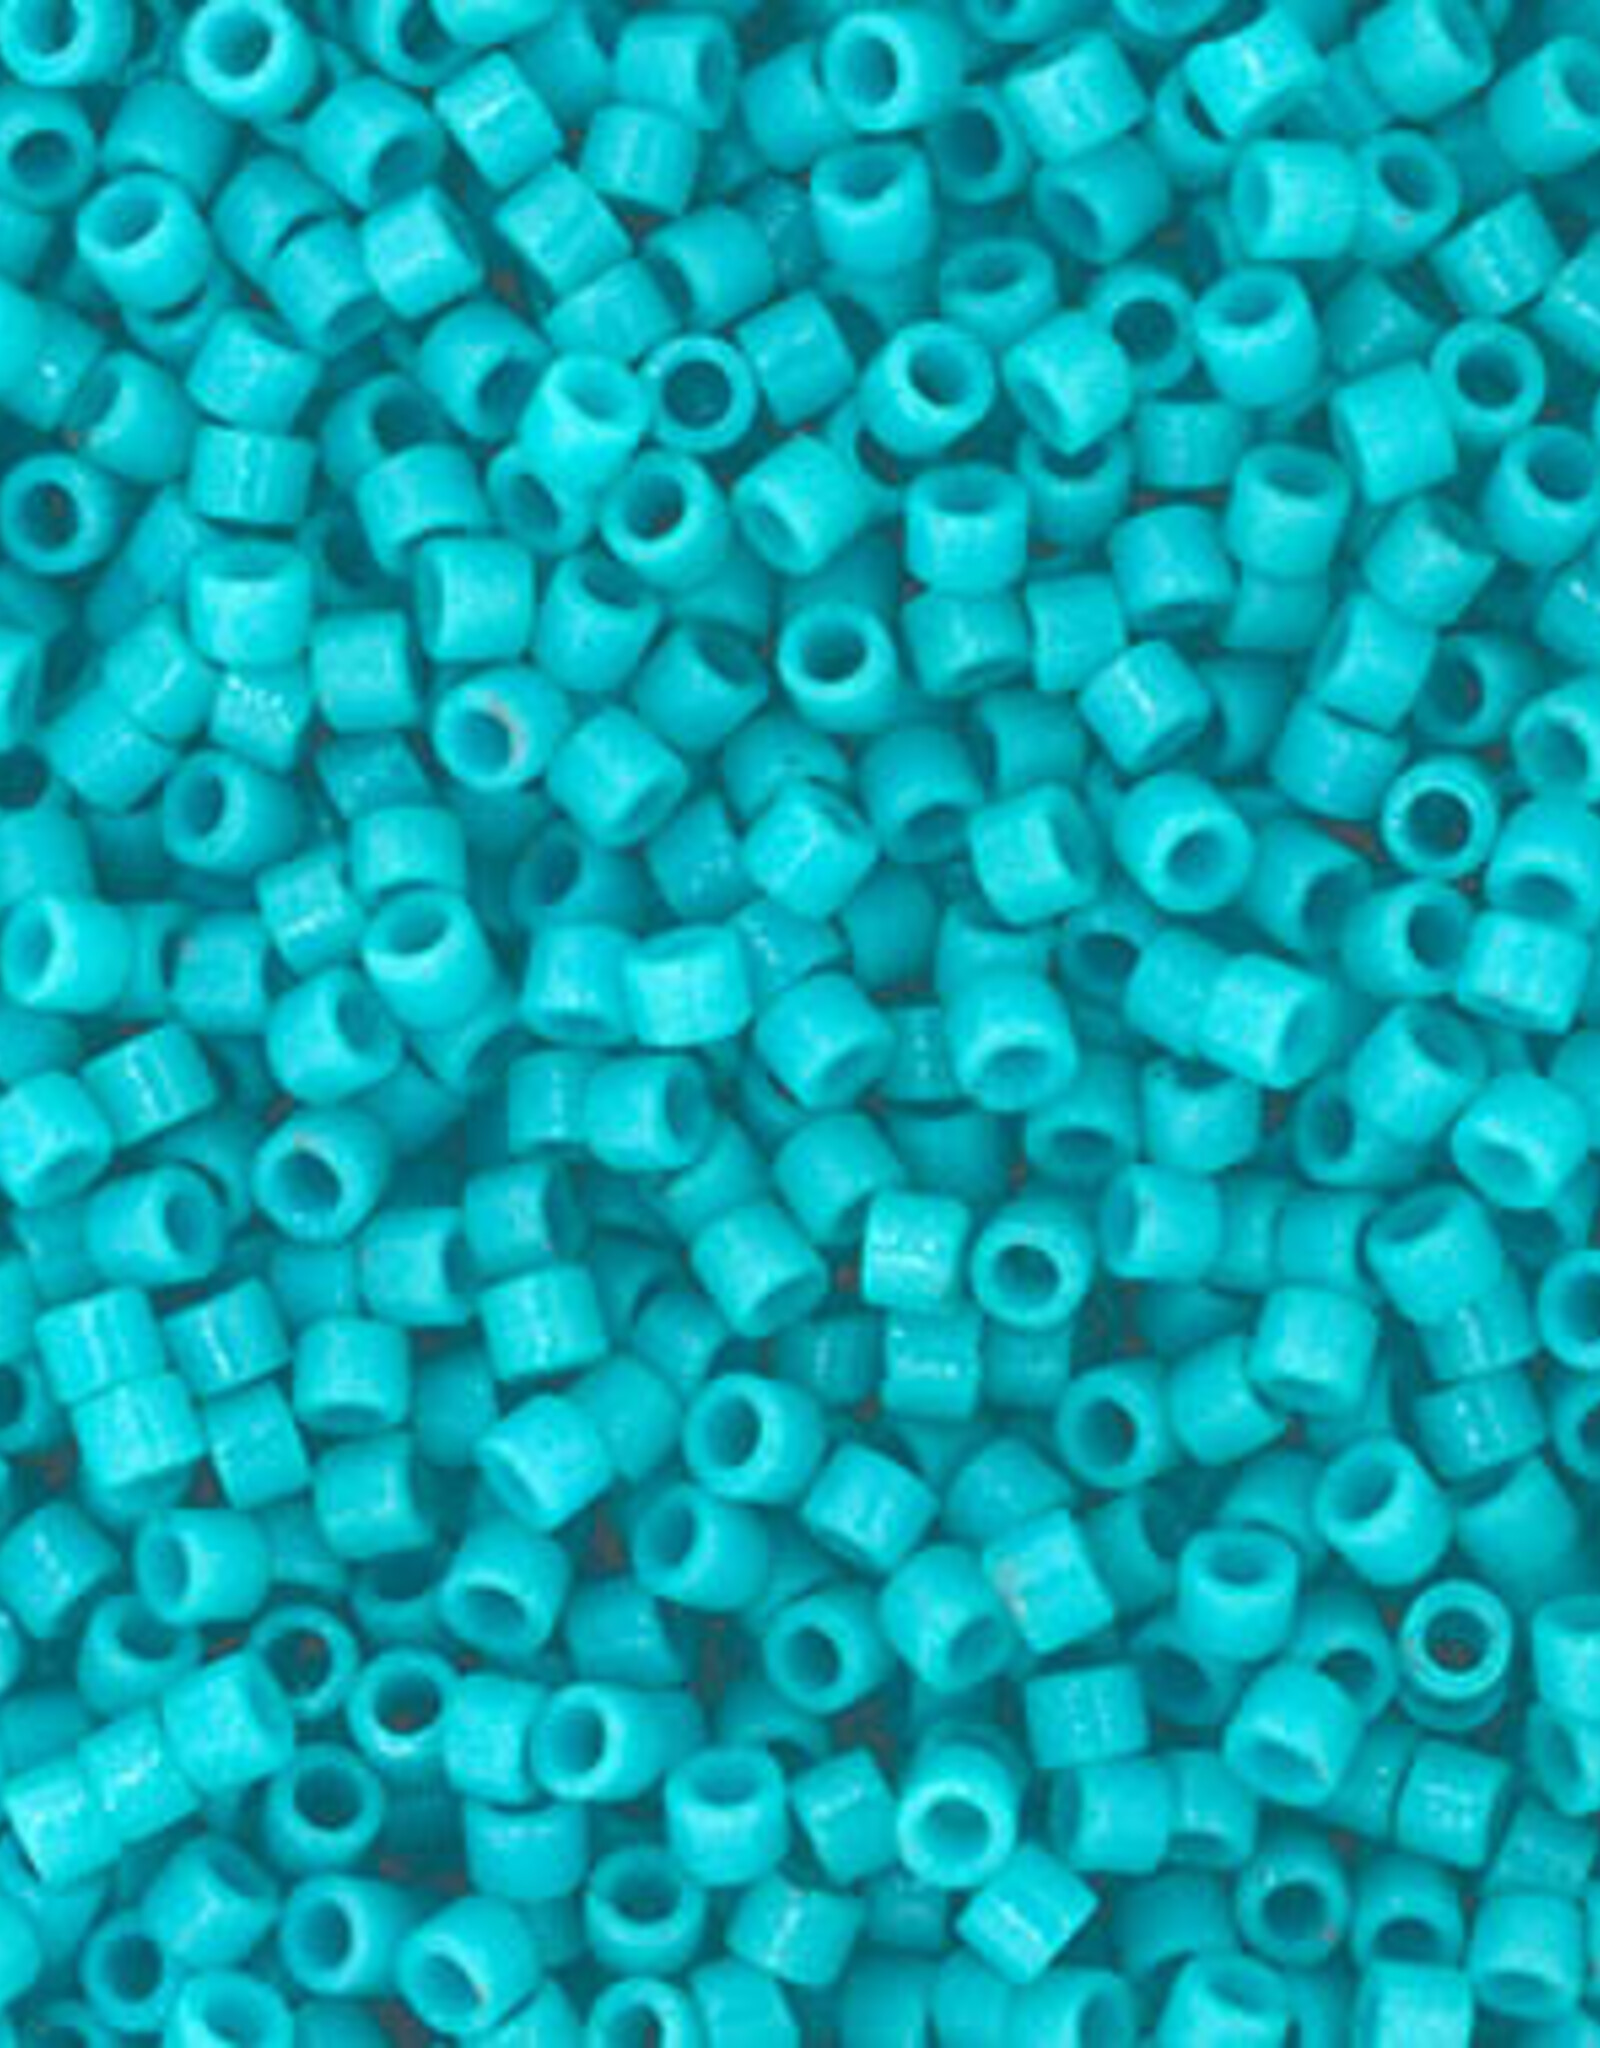 Miyuki Delica Seed Beads Delica Program 11/0 Rd Duracoat Opaque Dyed Turquoise Blue 2130V